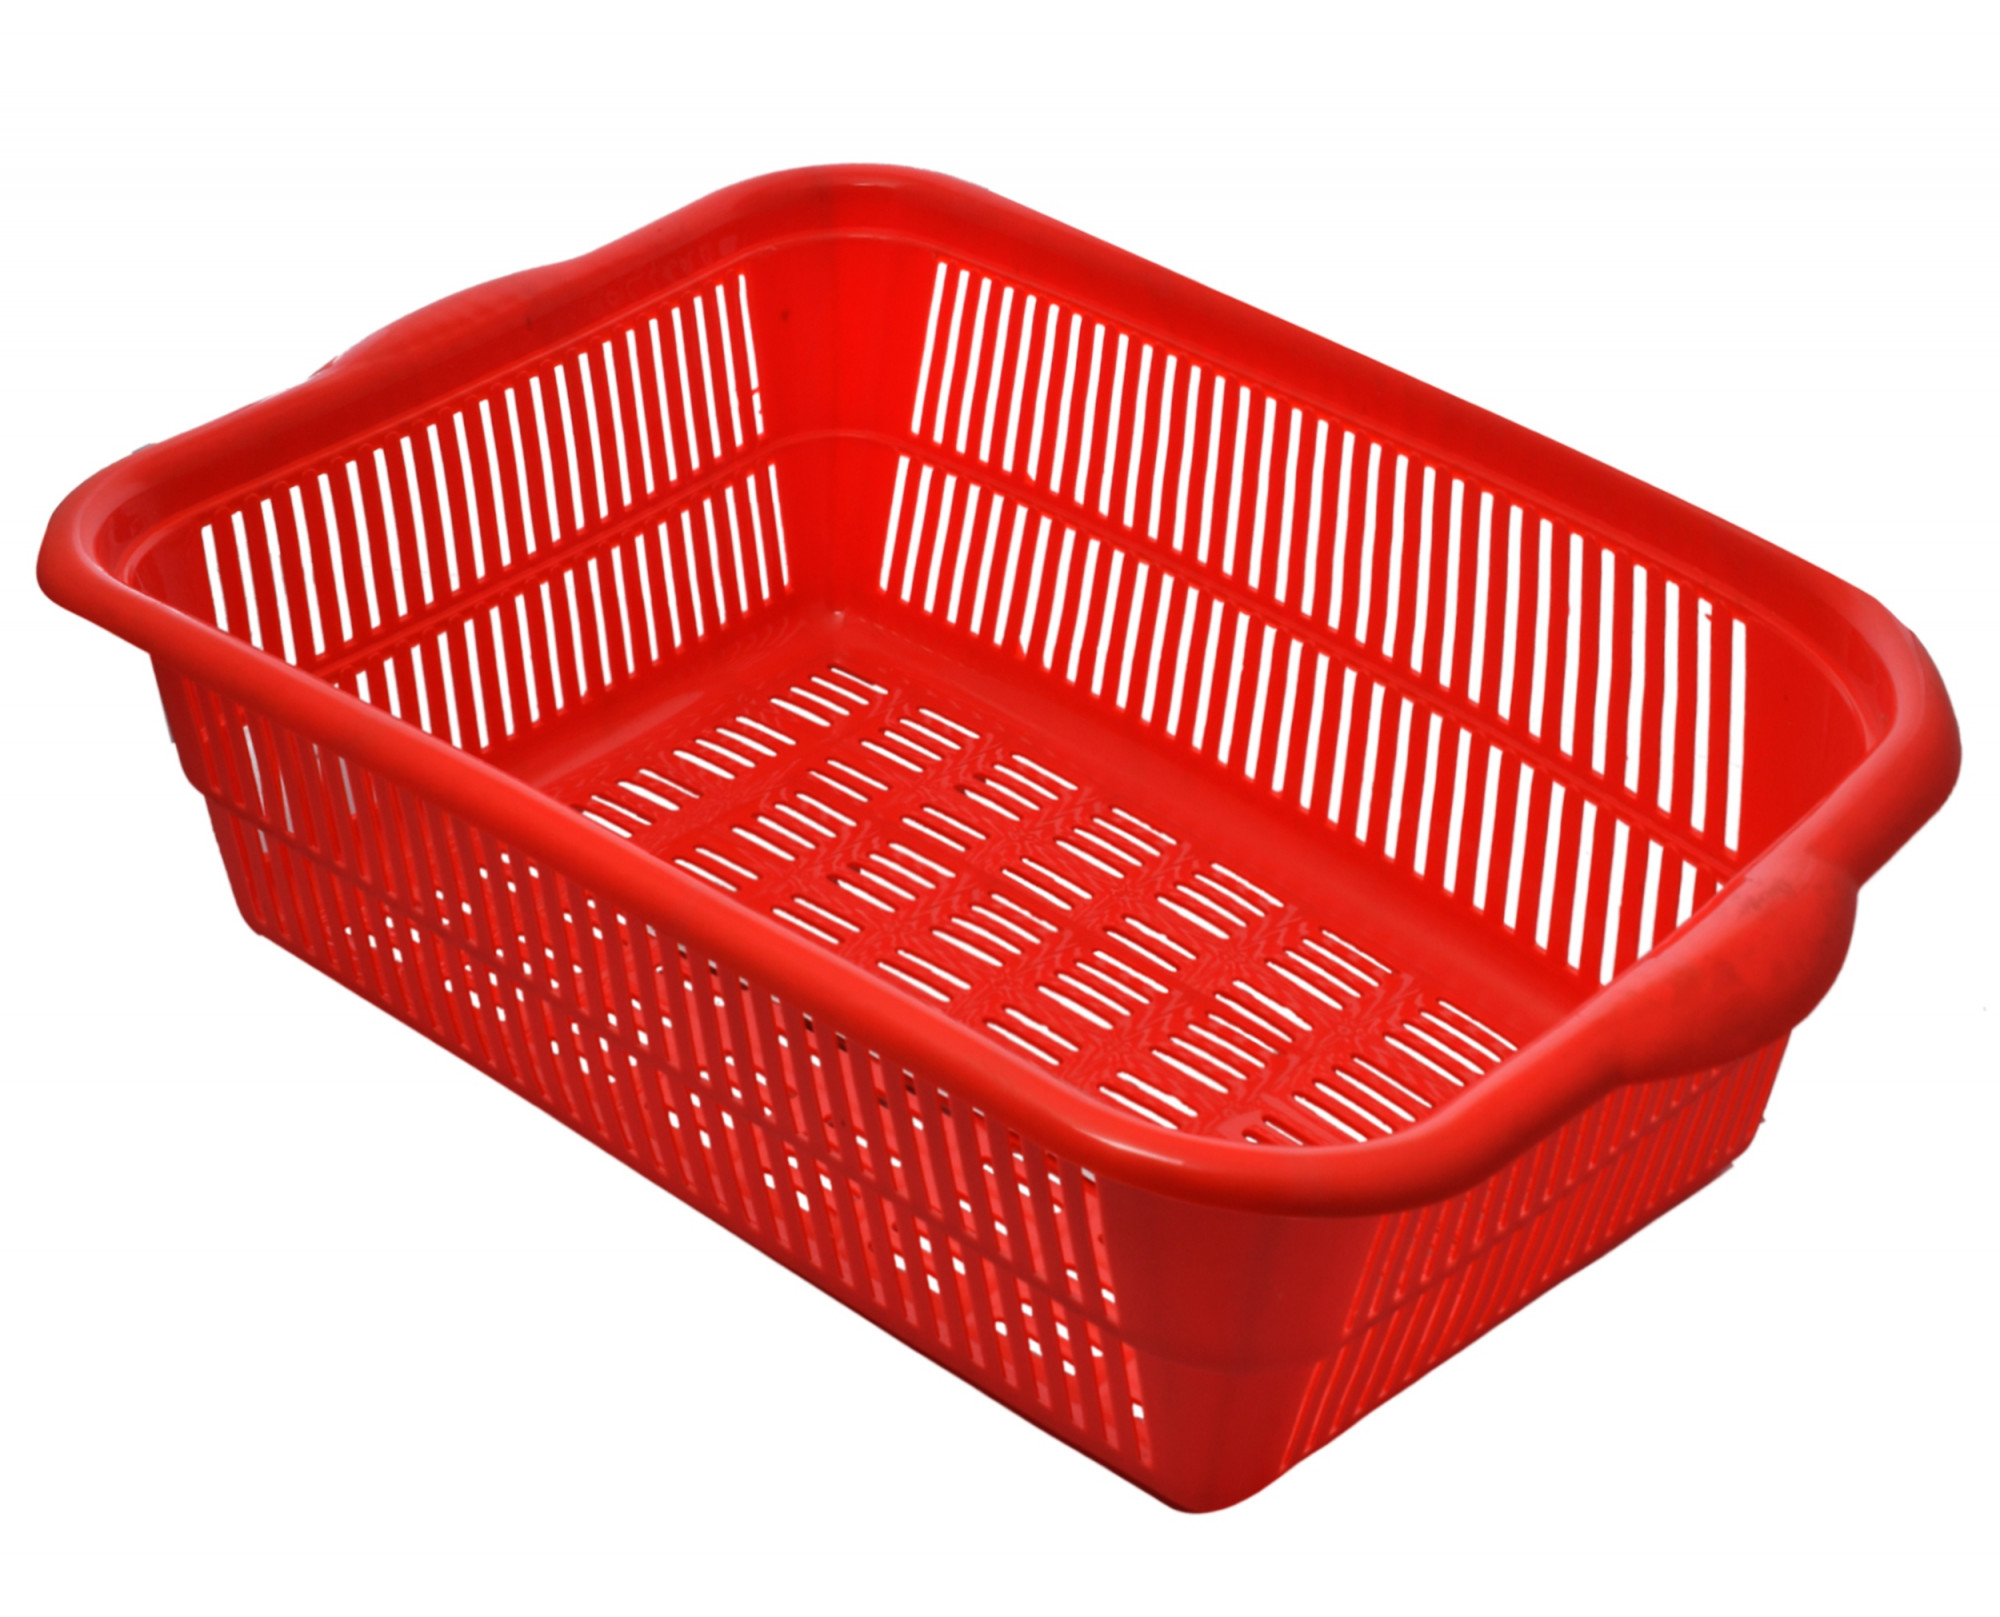 Kuber Industries 3 Pieces Plastic Kitchen Dish Rack Drainer Vegetables And Fruits Basket Dish Rack Multipurpose Organizers ,Medium Size,Red